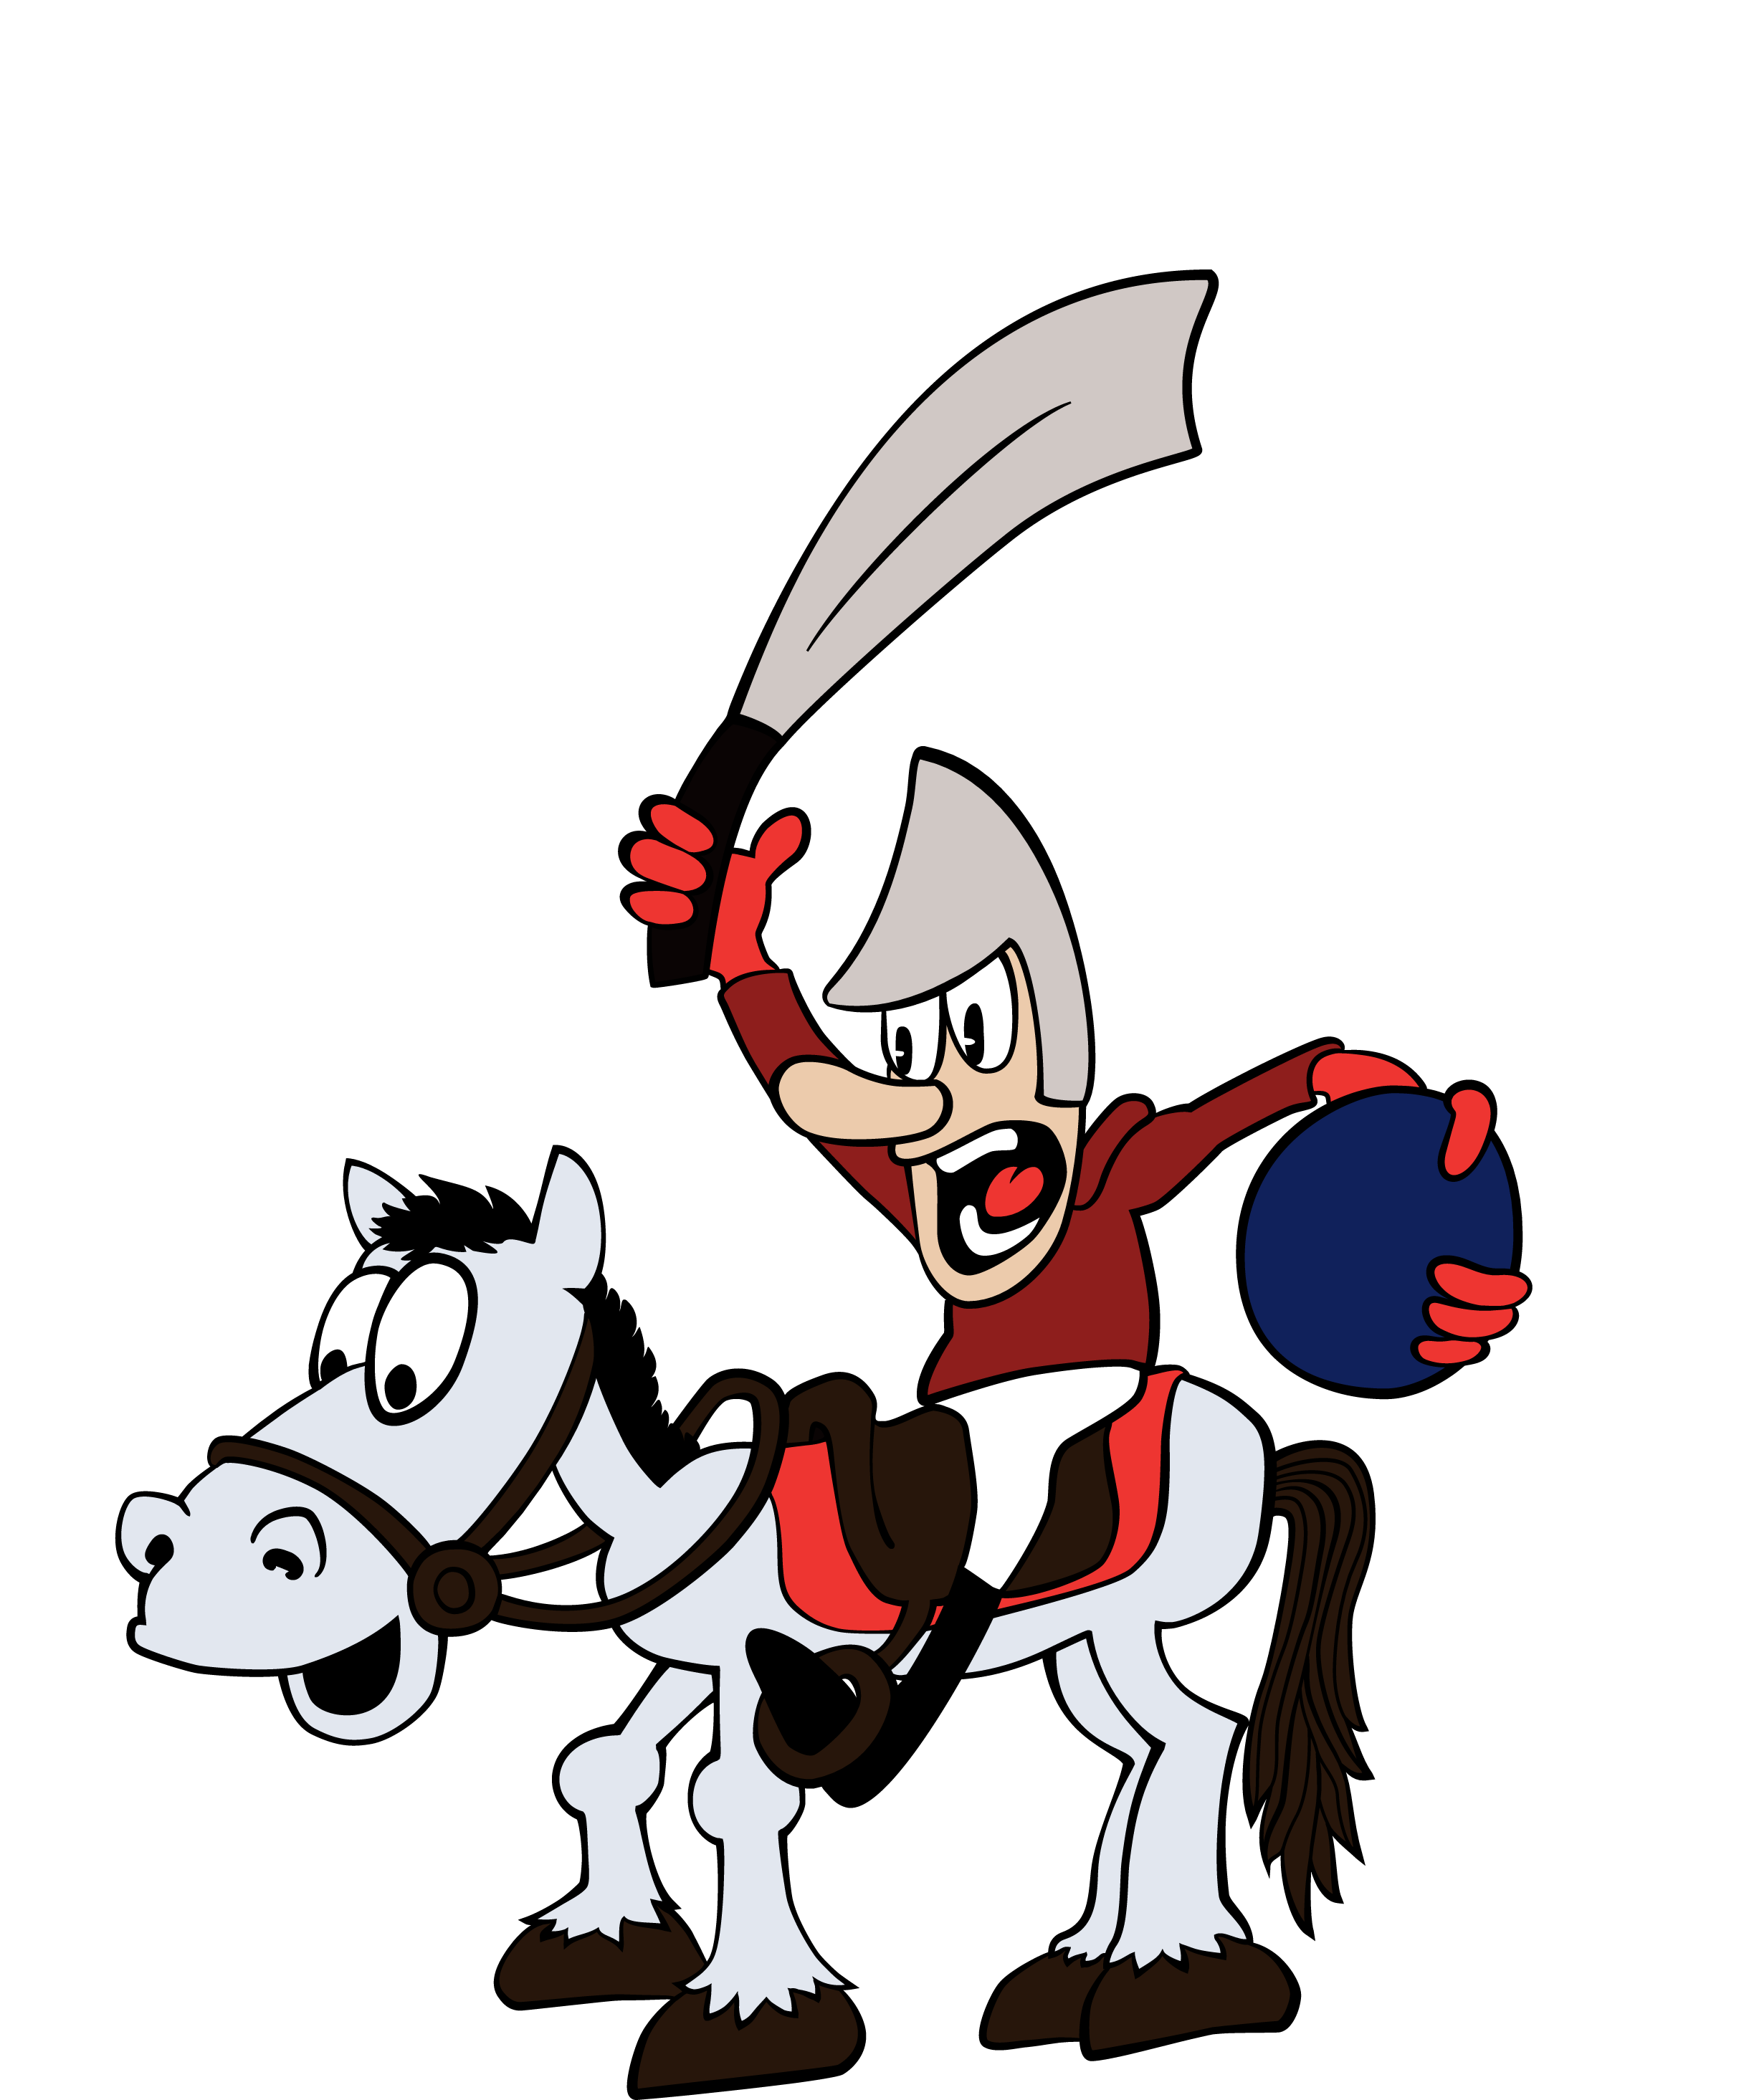 OLD POWER